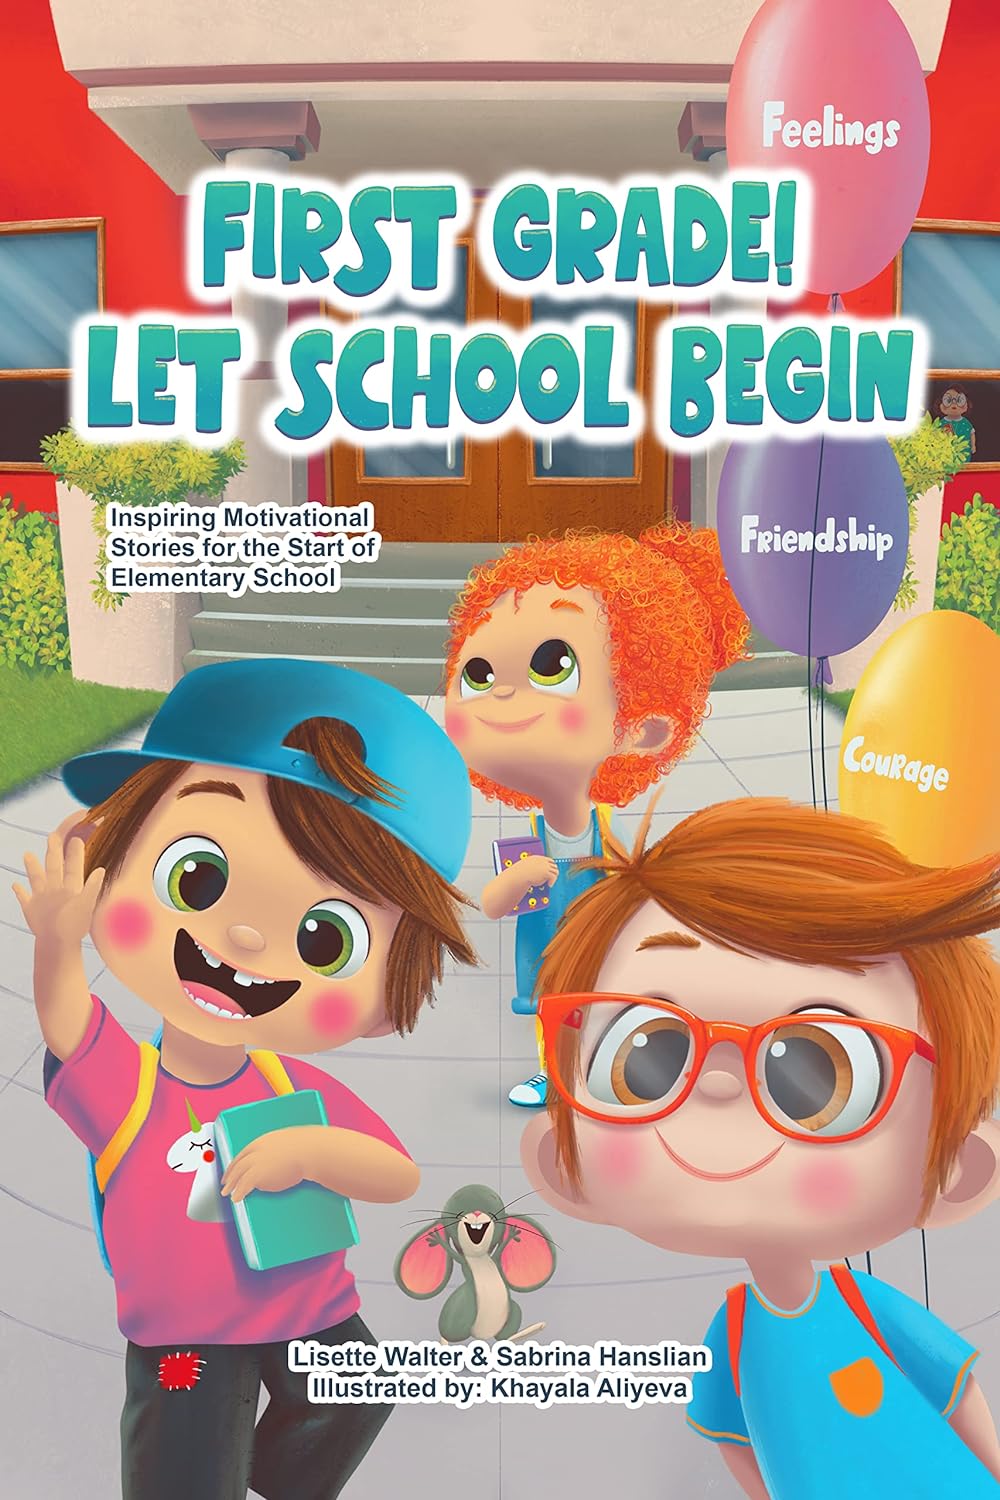 First Grade! Let School Begin: Inspiring Motivational Stories about Feelings, Courage, and Friendship For the Start of Elementary School (English Edition)